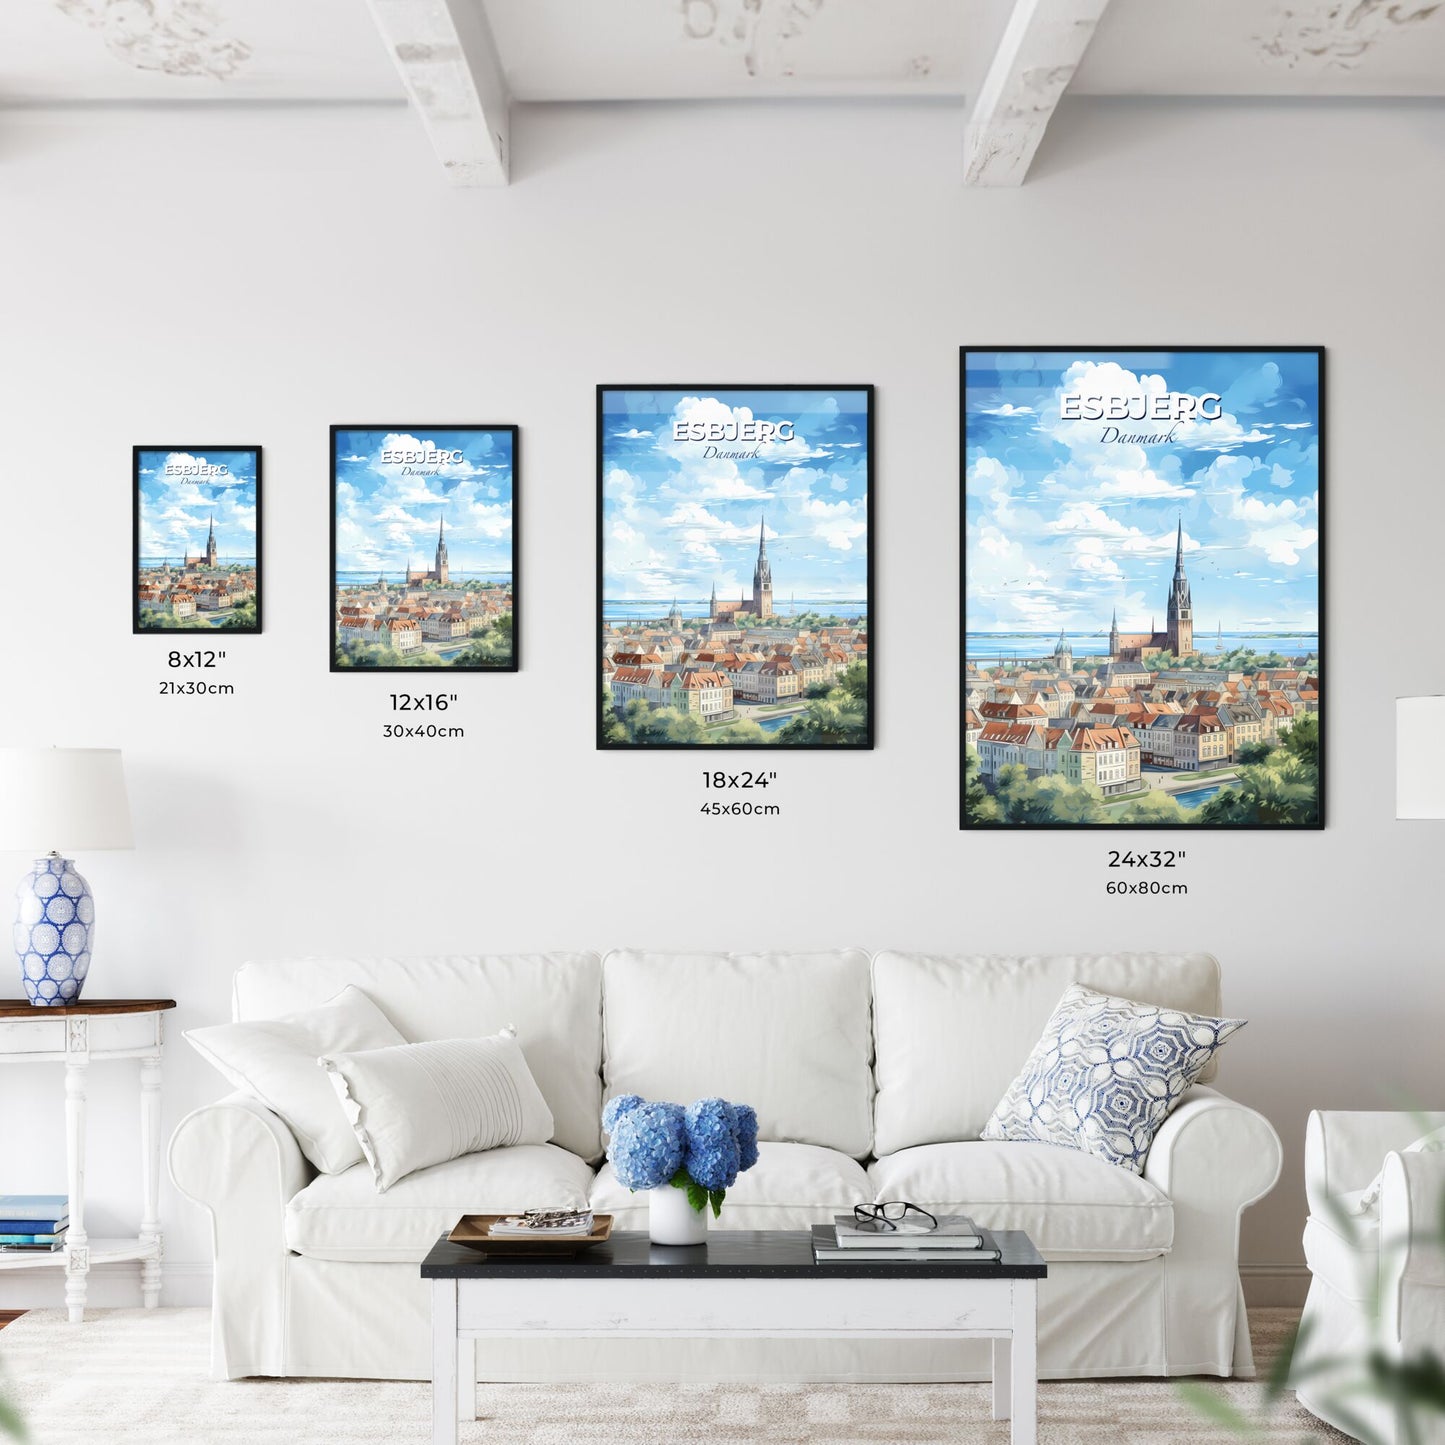 Esbjerg Danmark Skyline - A City With A Tall Tower And A Body Of Water - Customizable Travel Gift Default Title